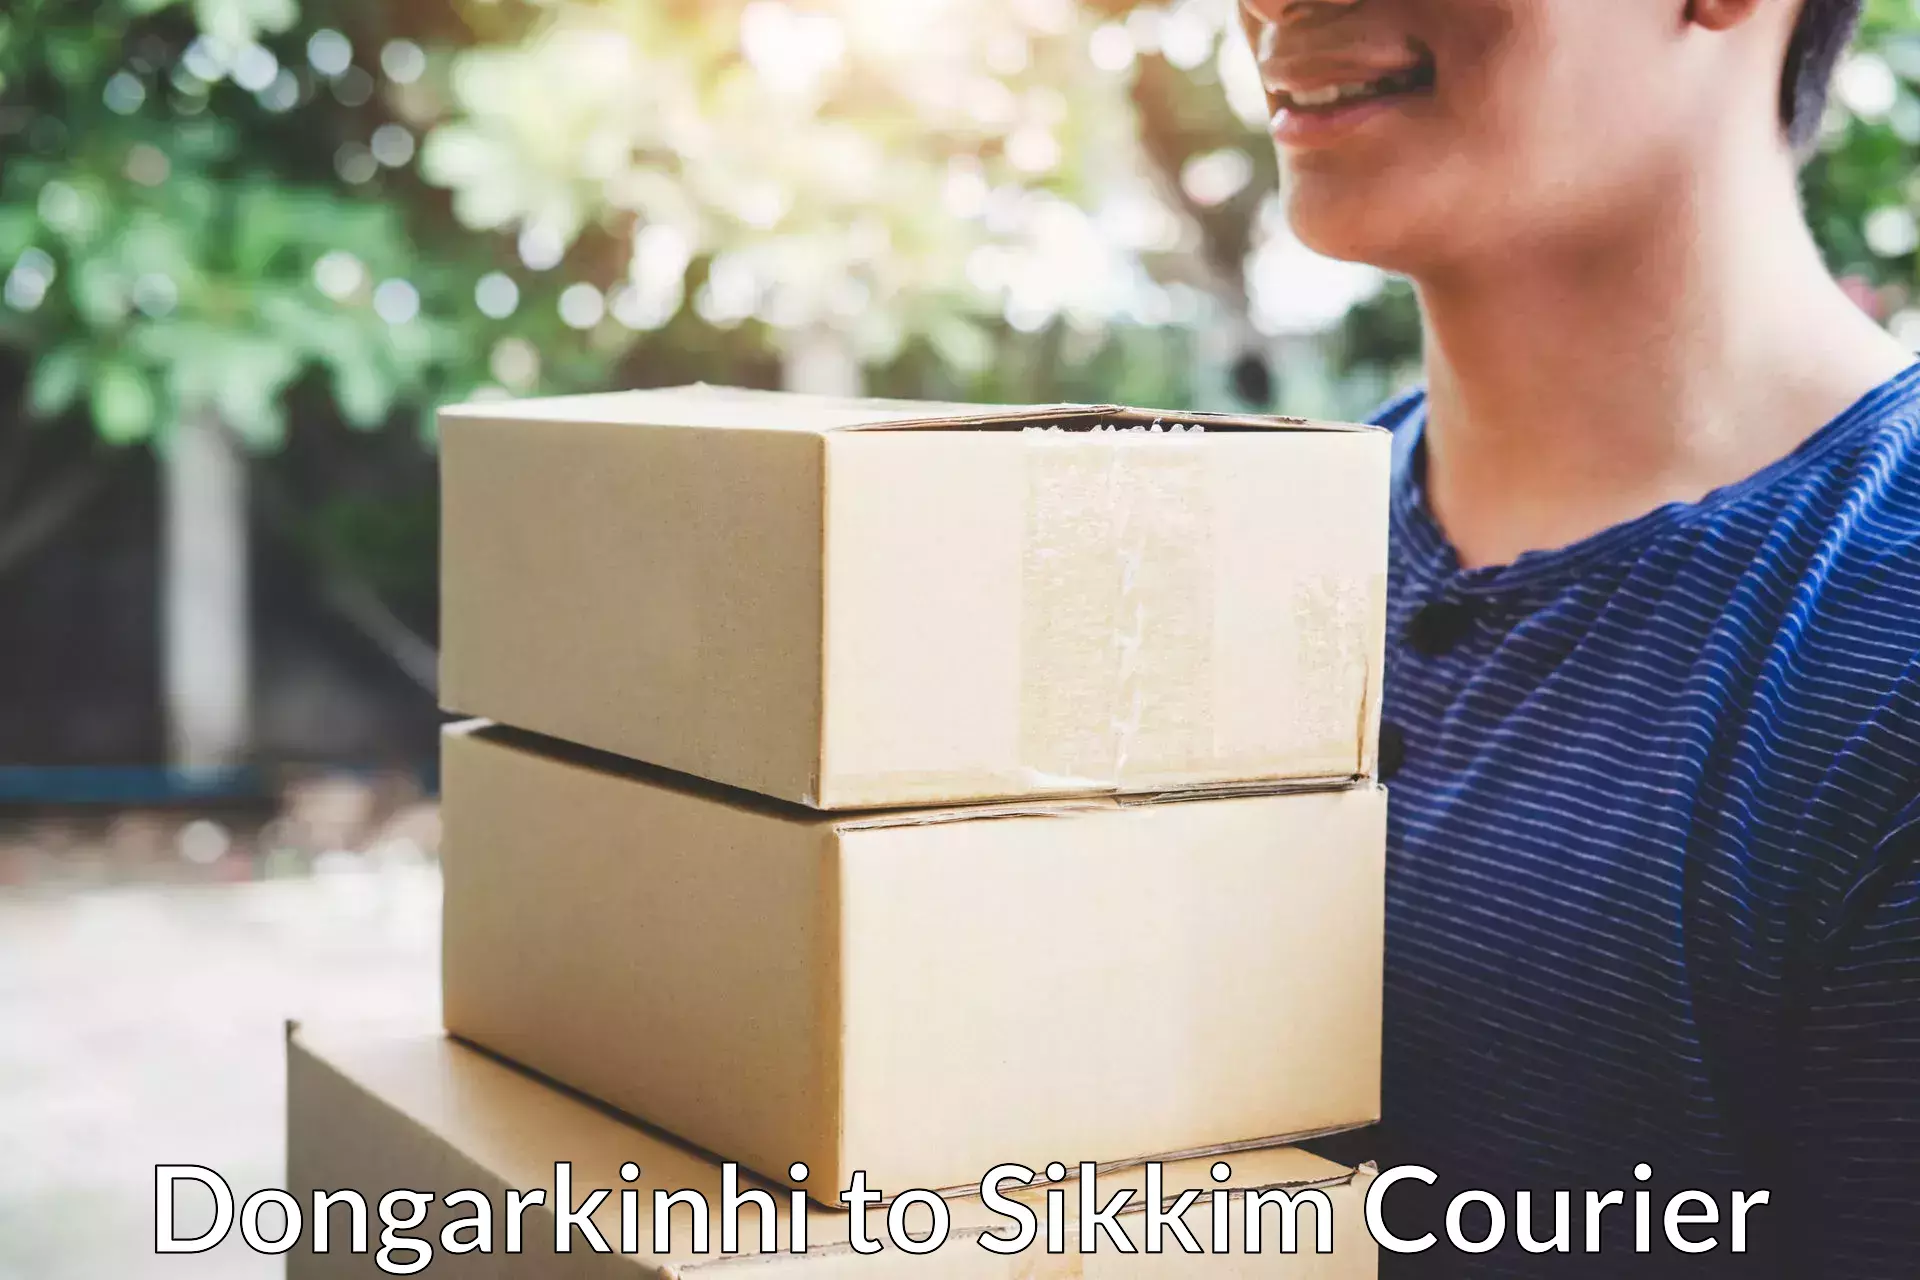 Efficient moving and packing Dongarkinhi to Sikkim